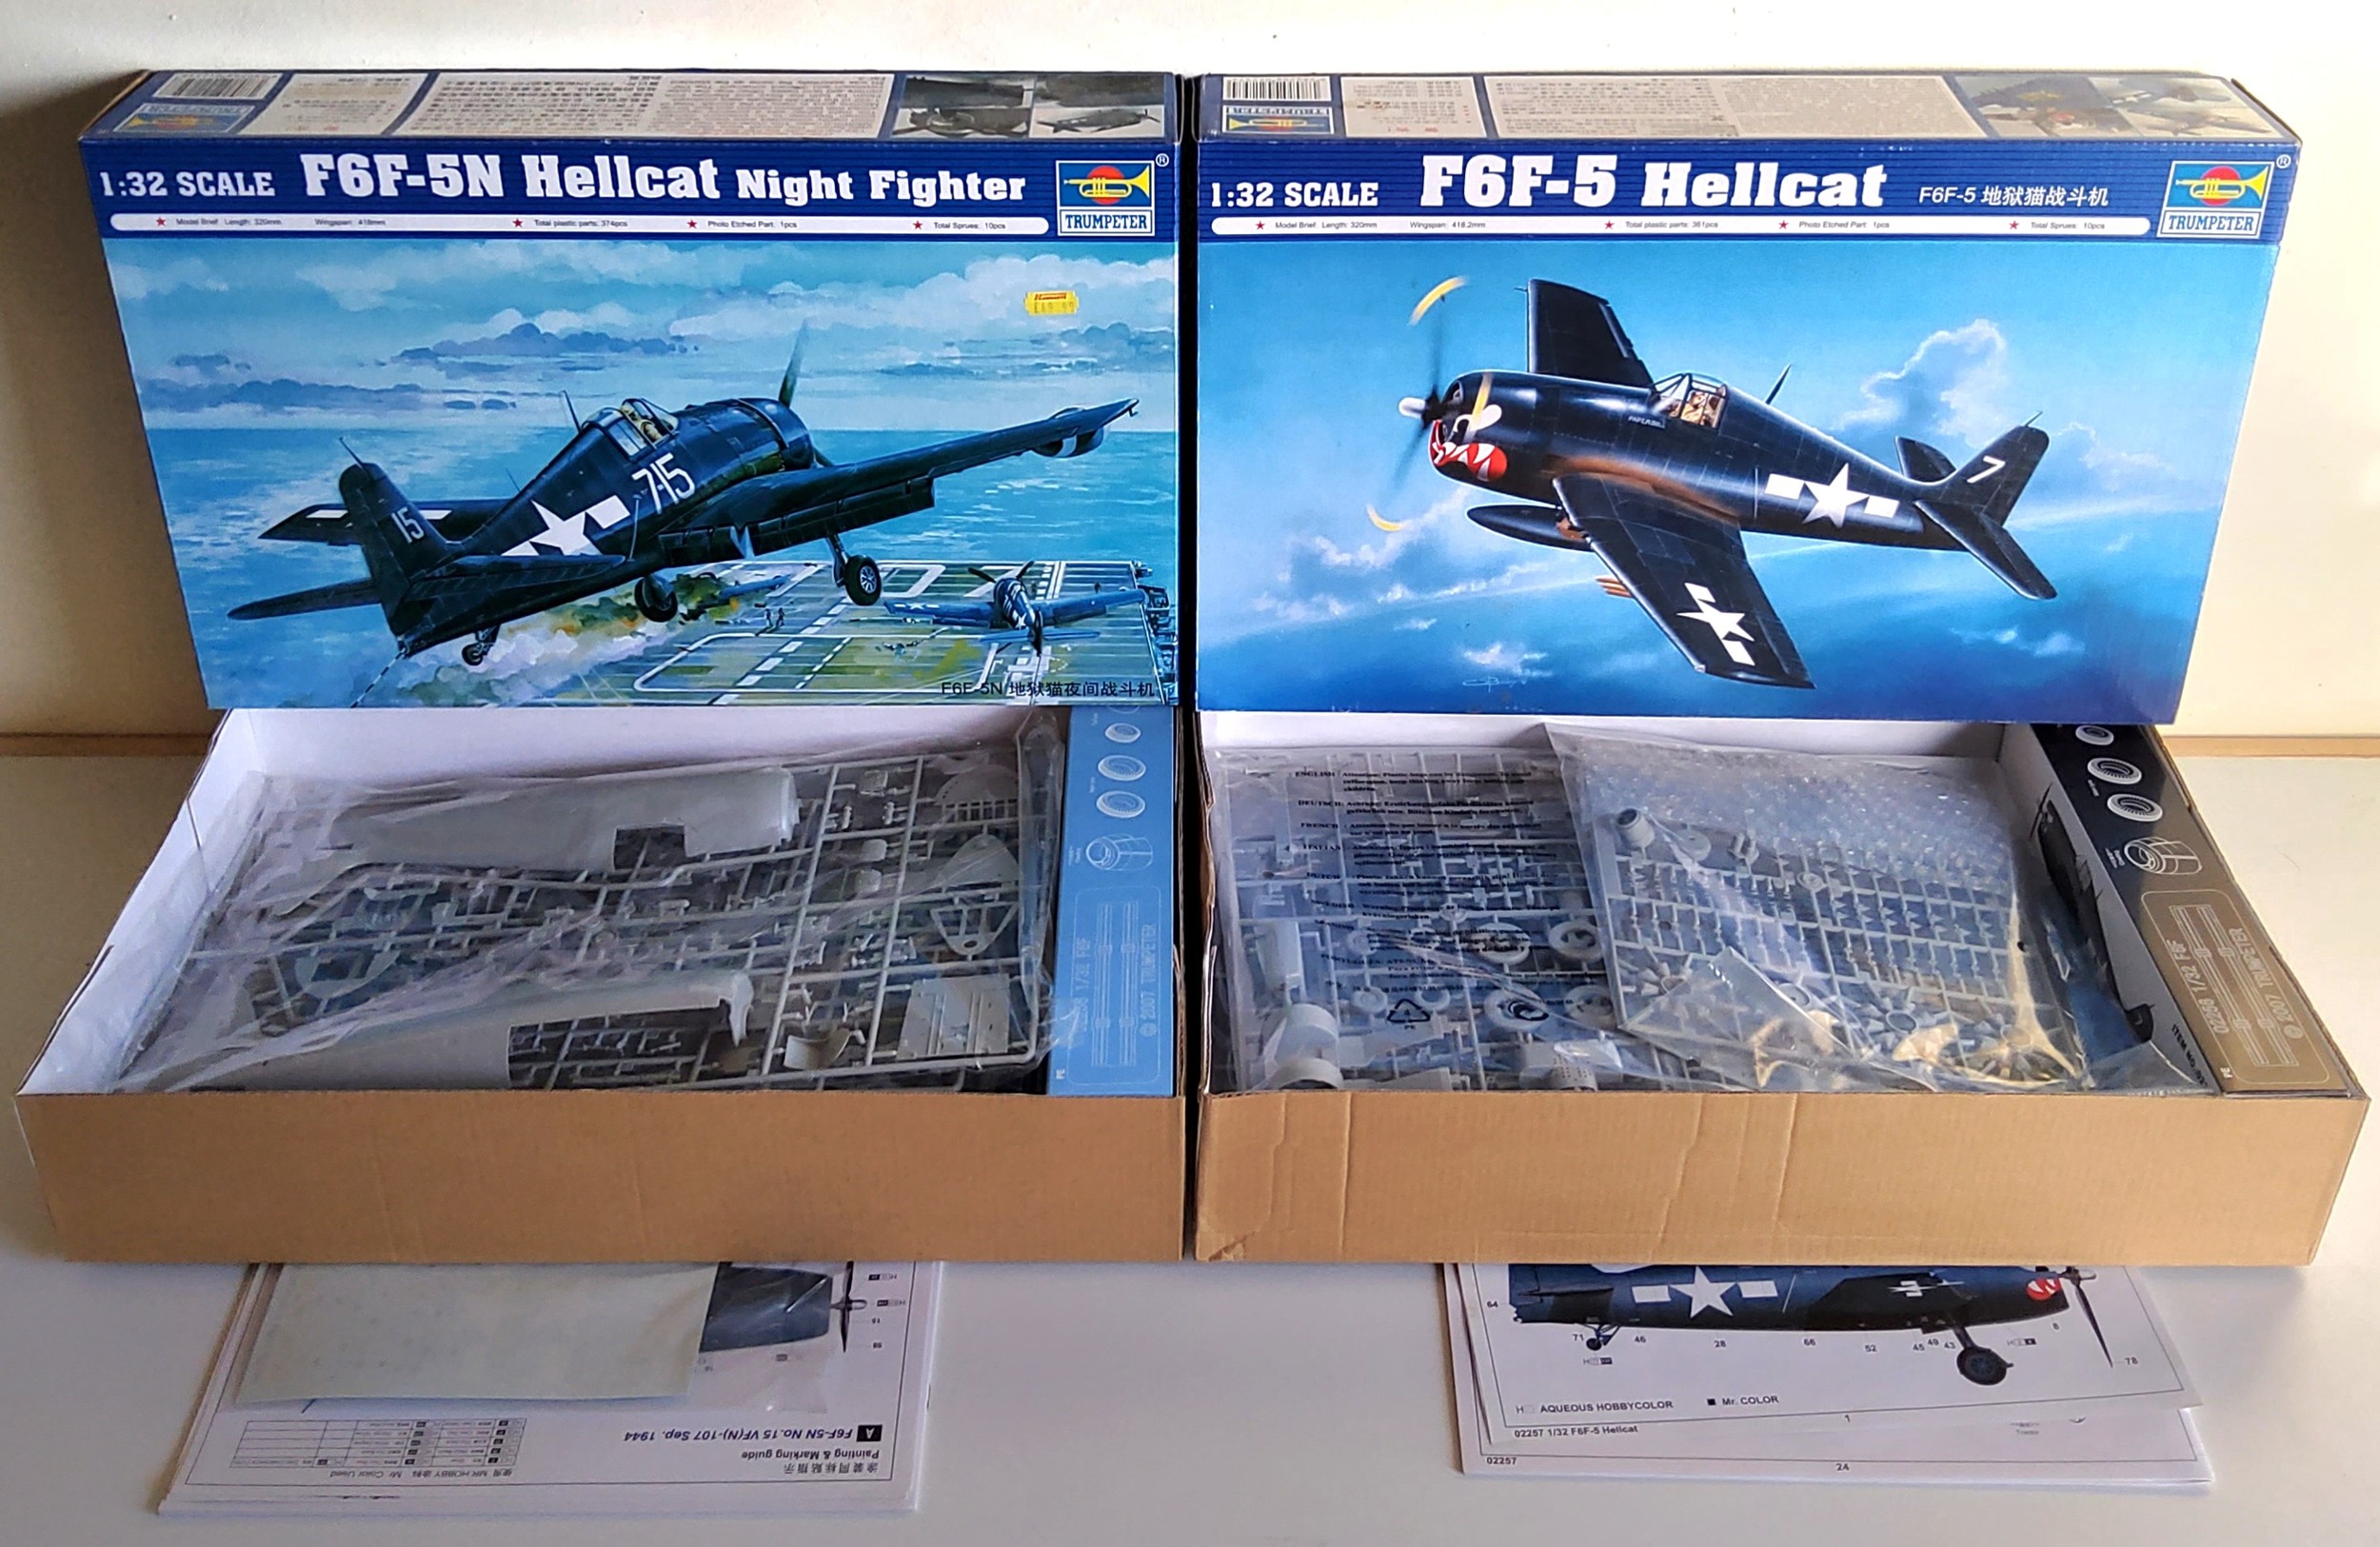 A Boxed Trumpeter 02259 1/32 scale F6F-5N Hellcat Night Fighter Aircraft Kit; a 02257 1/32 F6F-5